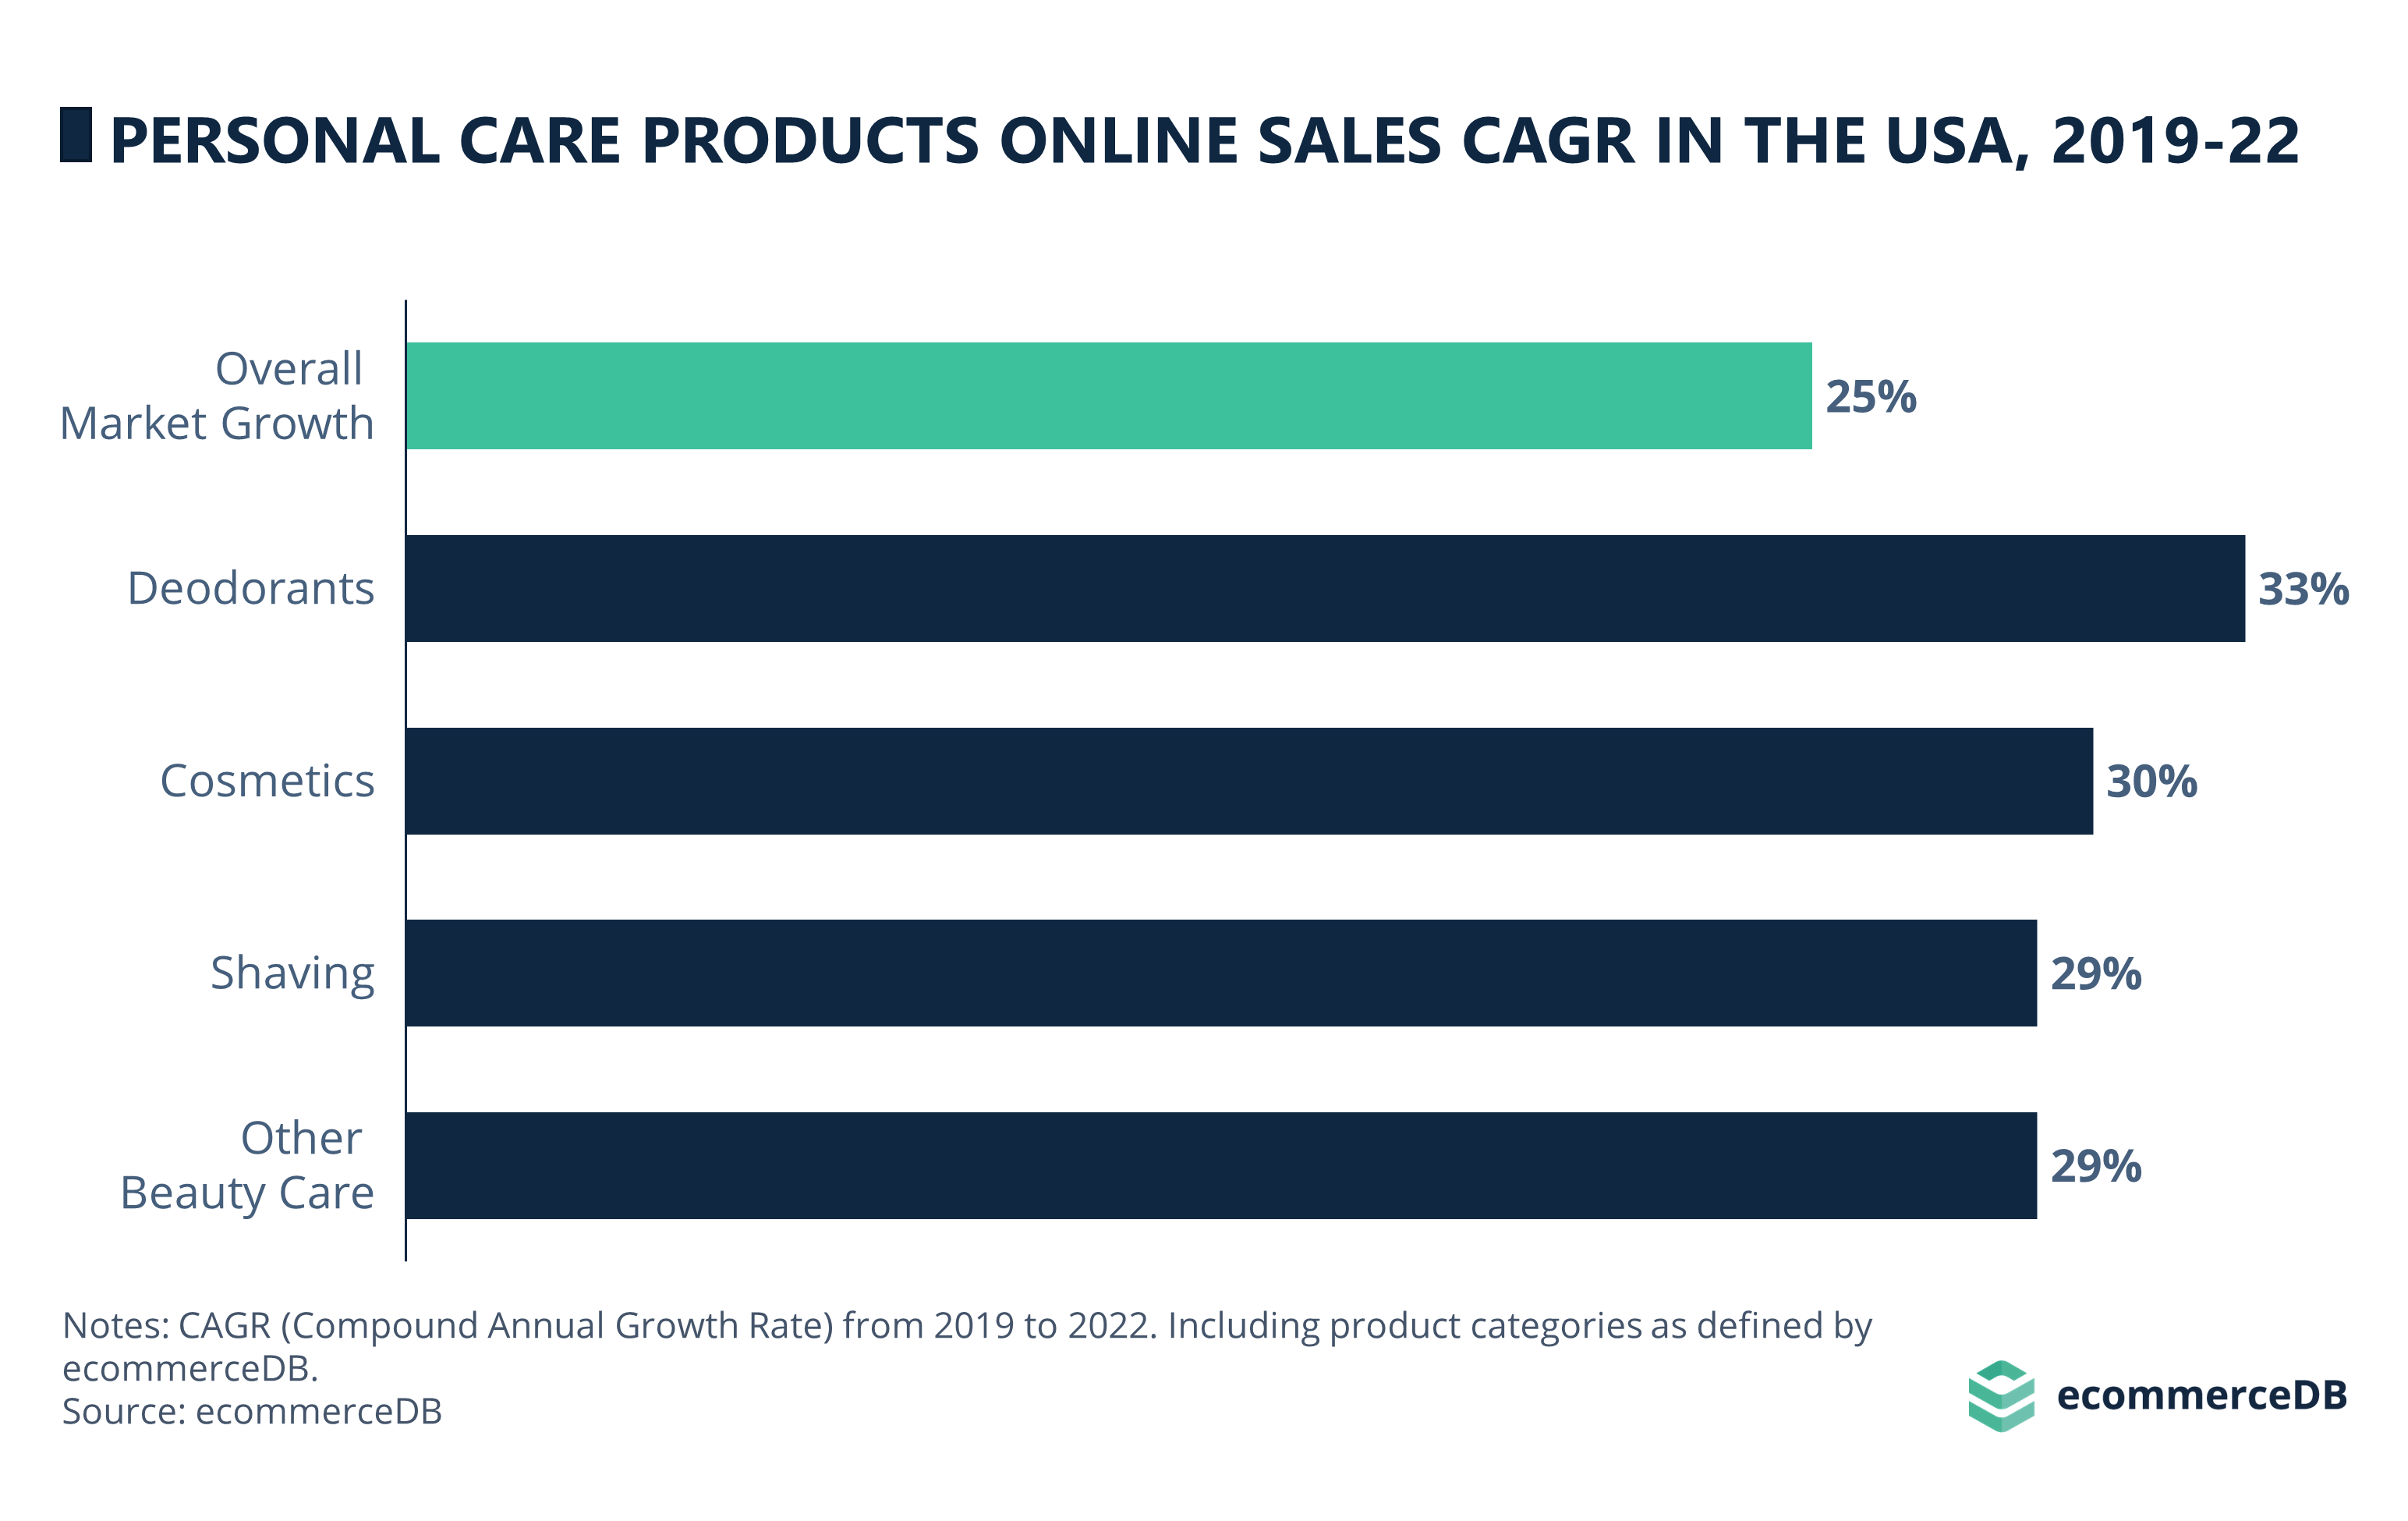 Personal Care Products Online Sales CAGR (2019-2022) in the U.S.